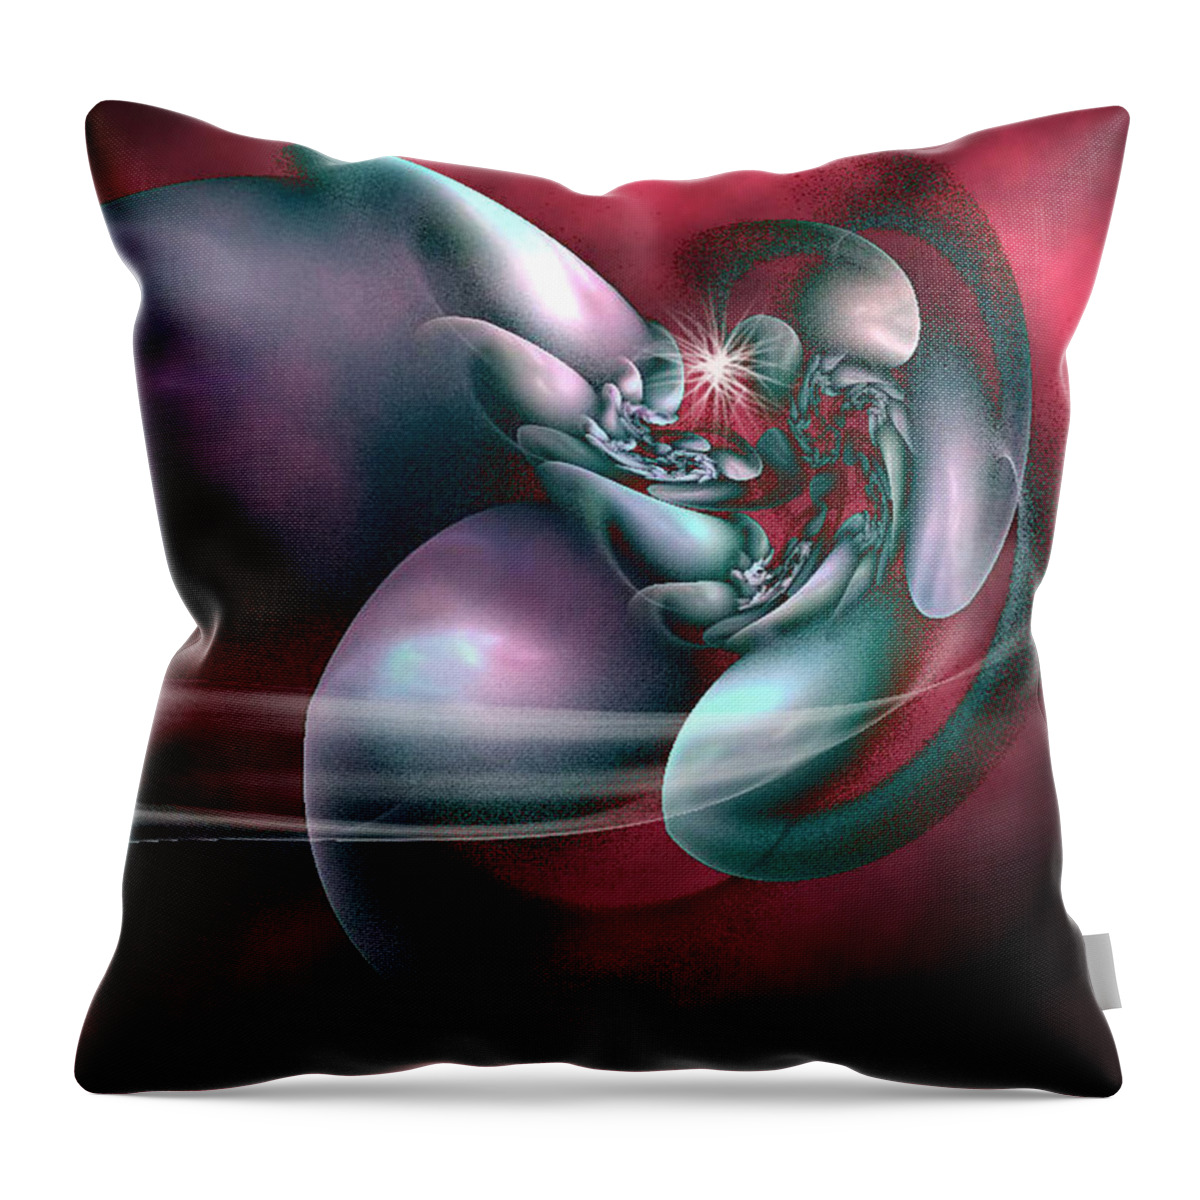 Fractal Throw Pillow featuring the digital art Arms Of Inspiration by Holly Ethan